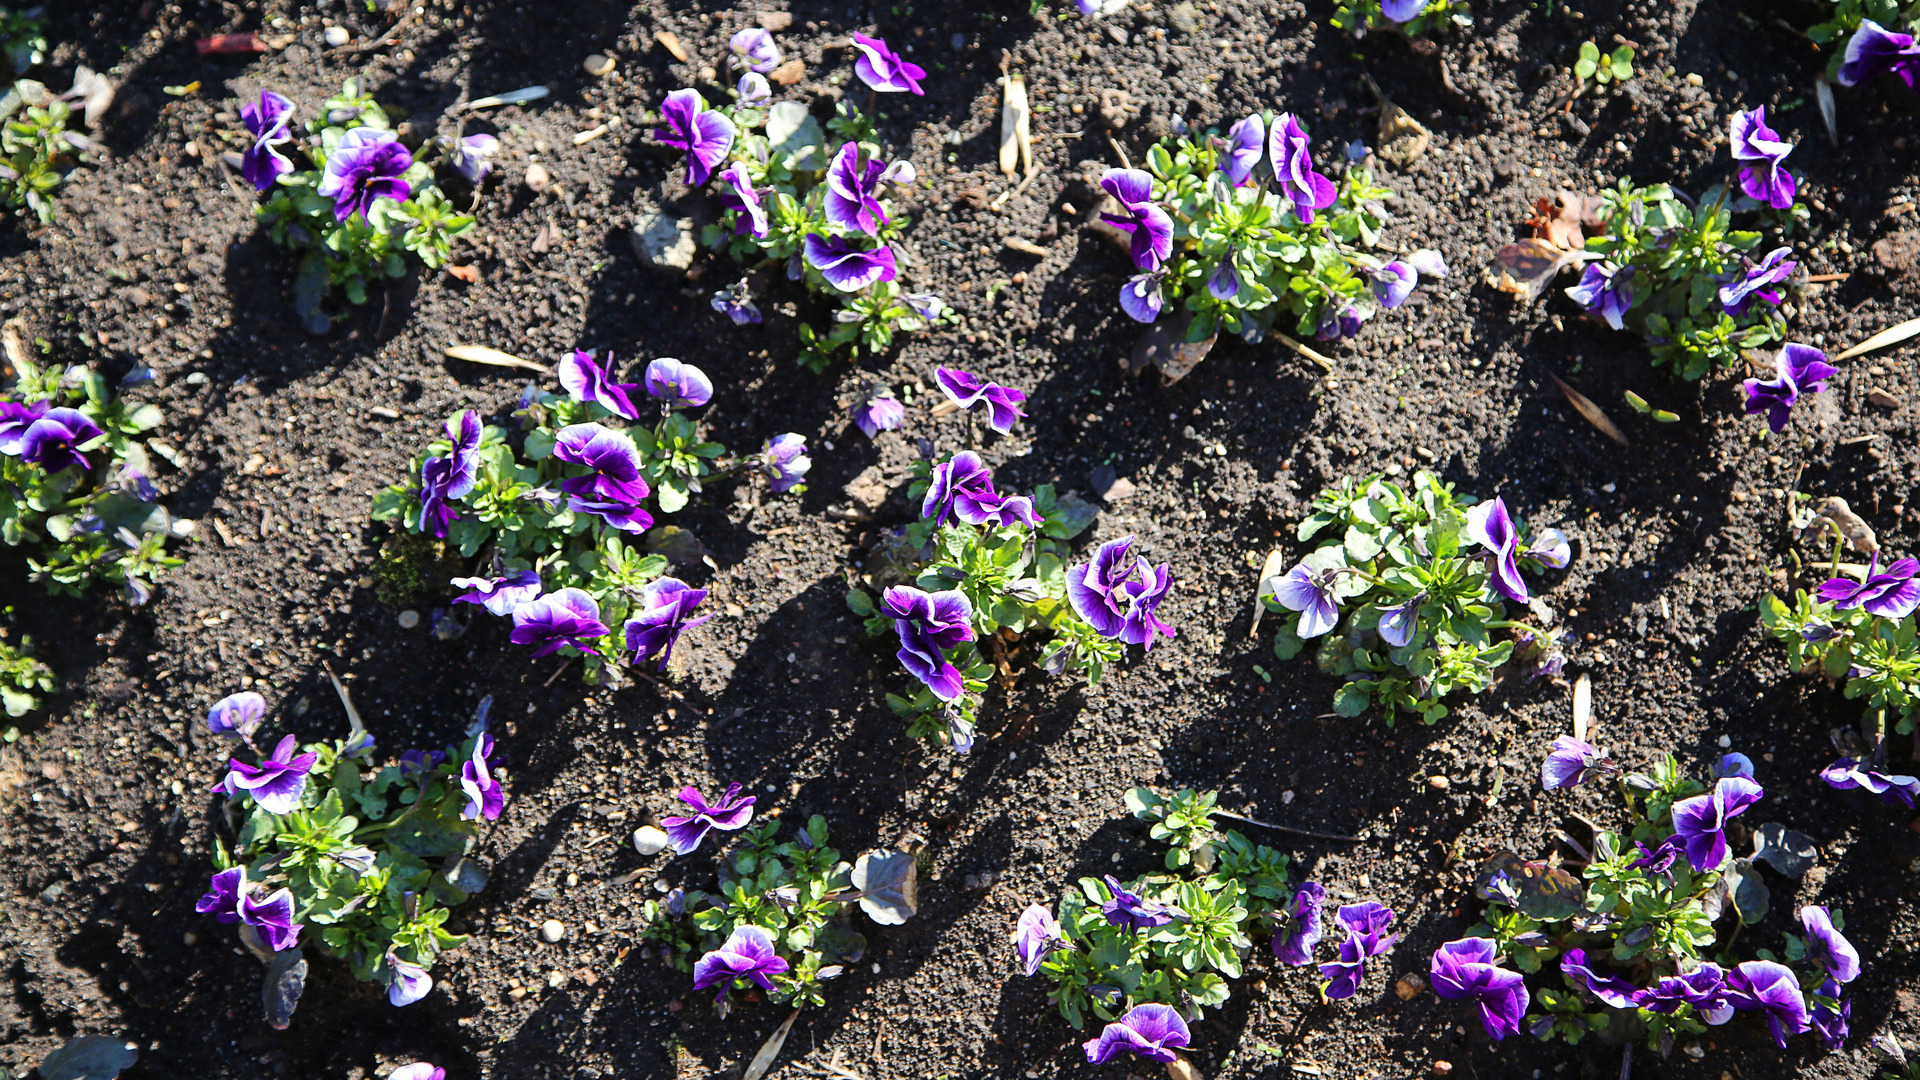 3 Things to Consider When Planting Annual Flowers in Your Landscape Beds